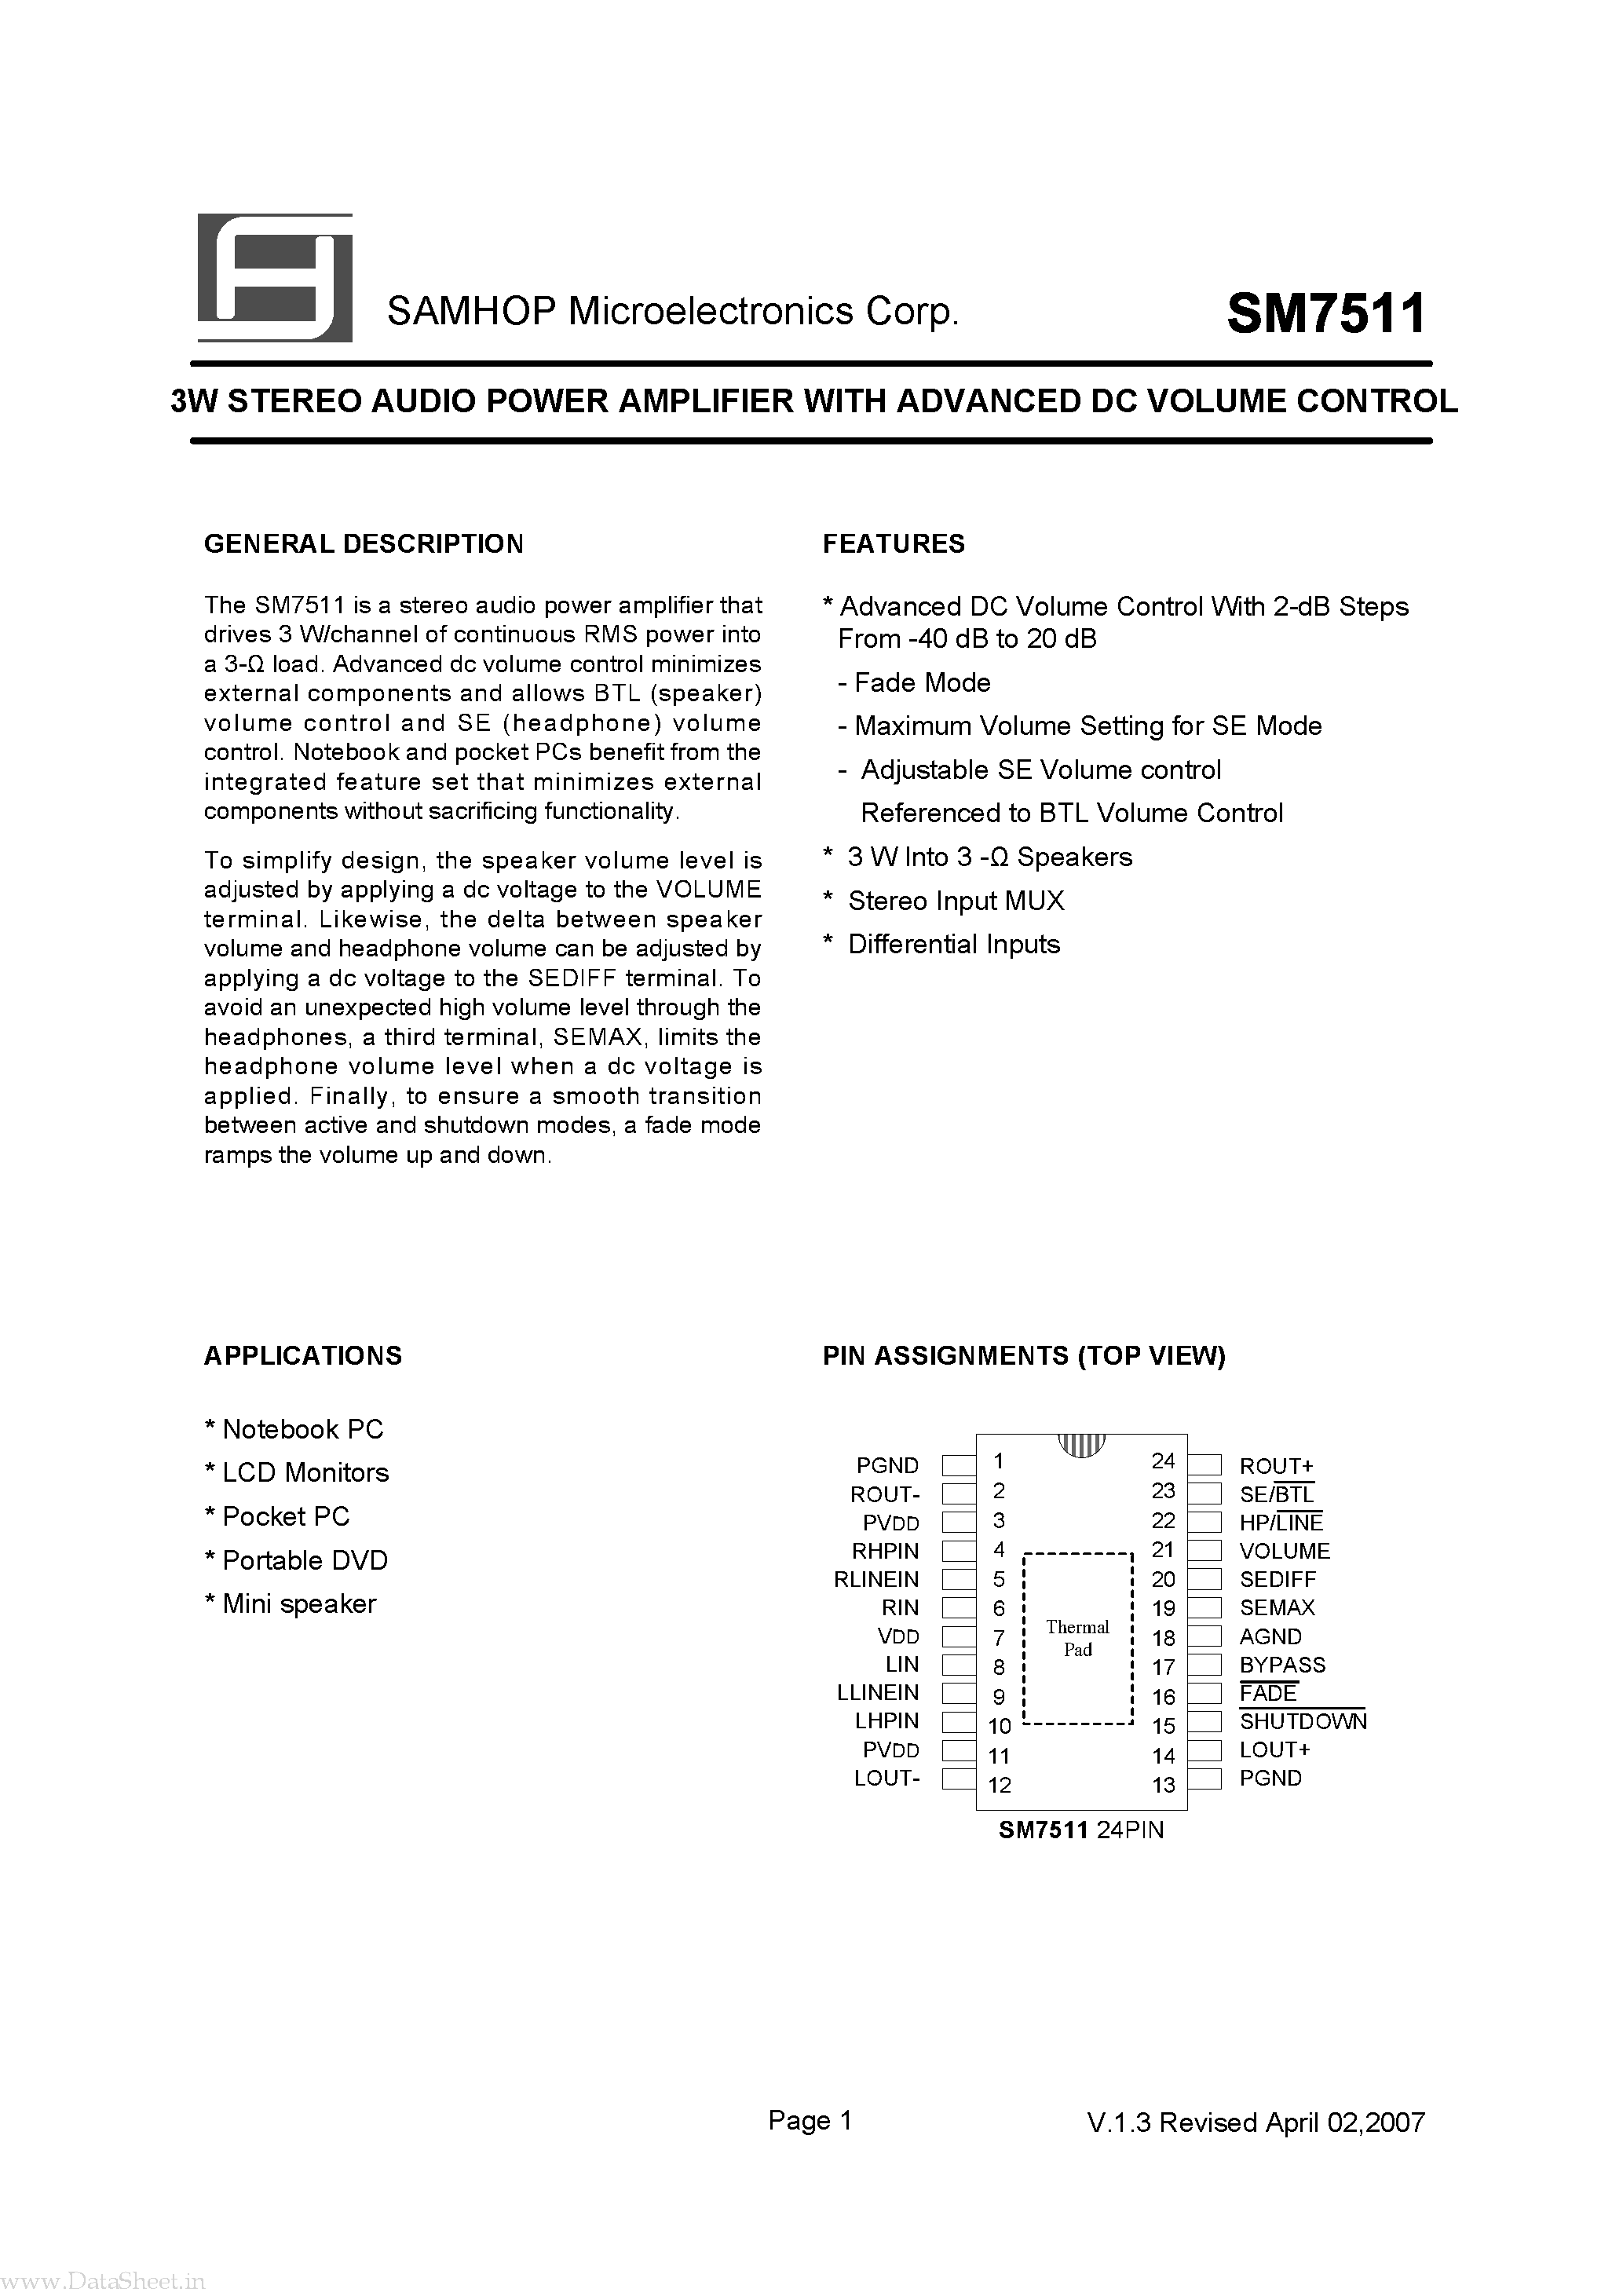 Datasheet SM7511 - 3W STEREO AUDIO POWER AMPLIFIER page 2